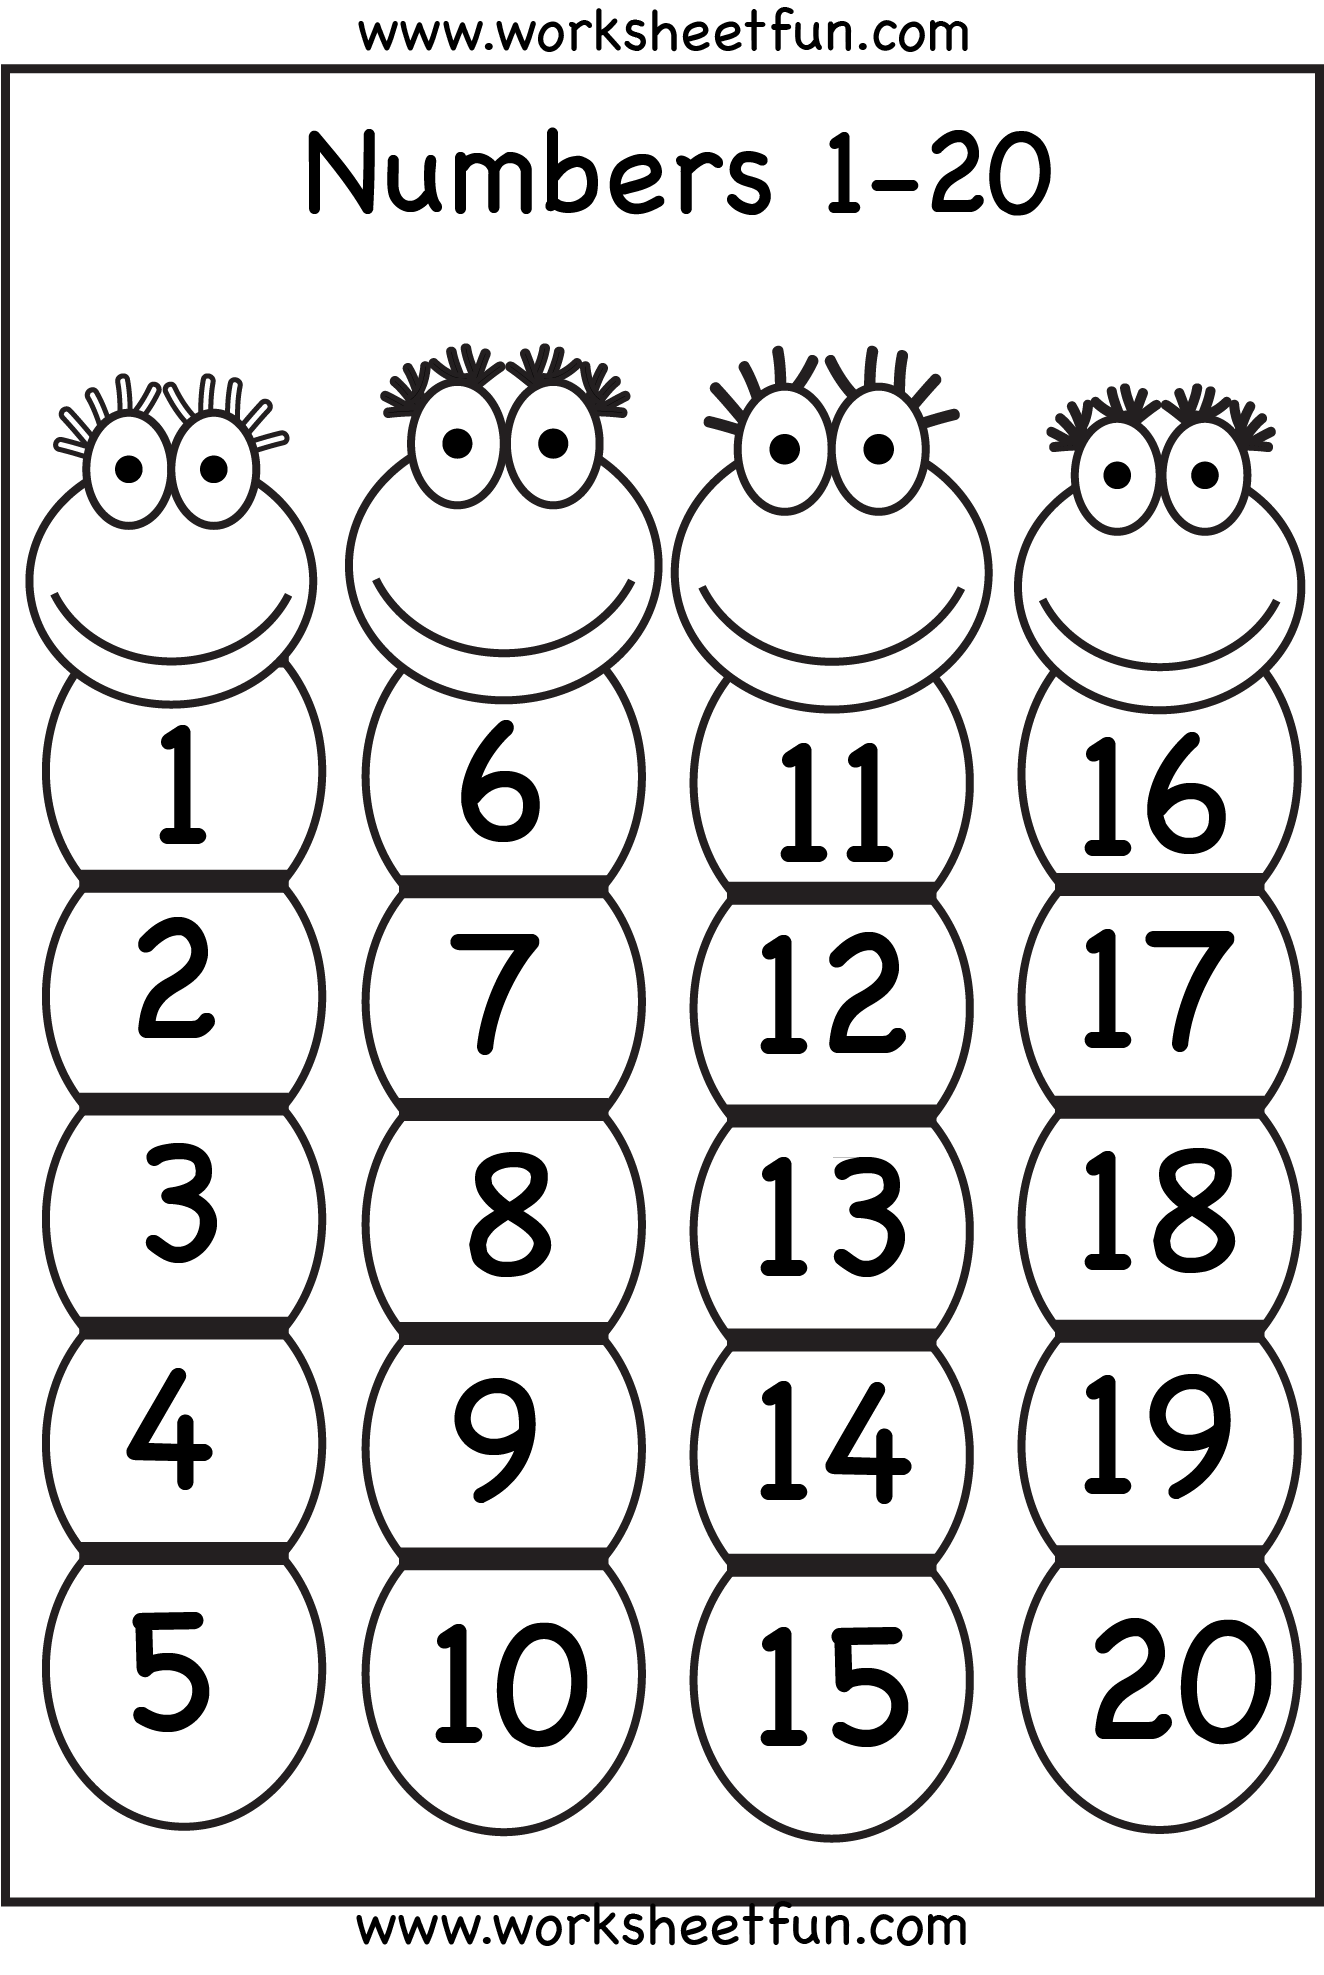 Printable Worksheets For Writing Numbers 1 20